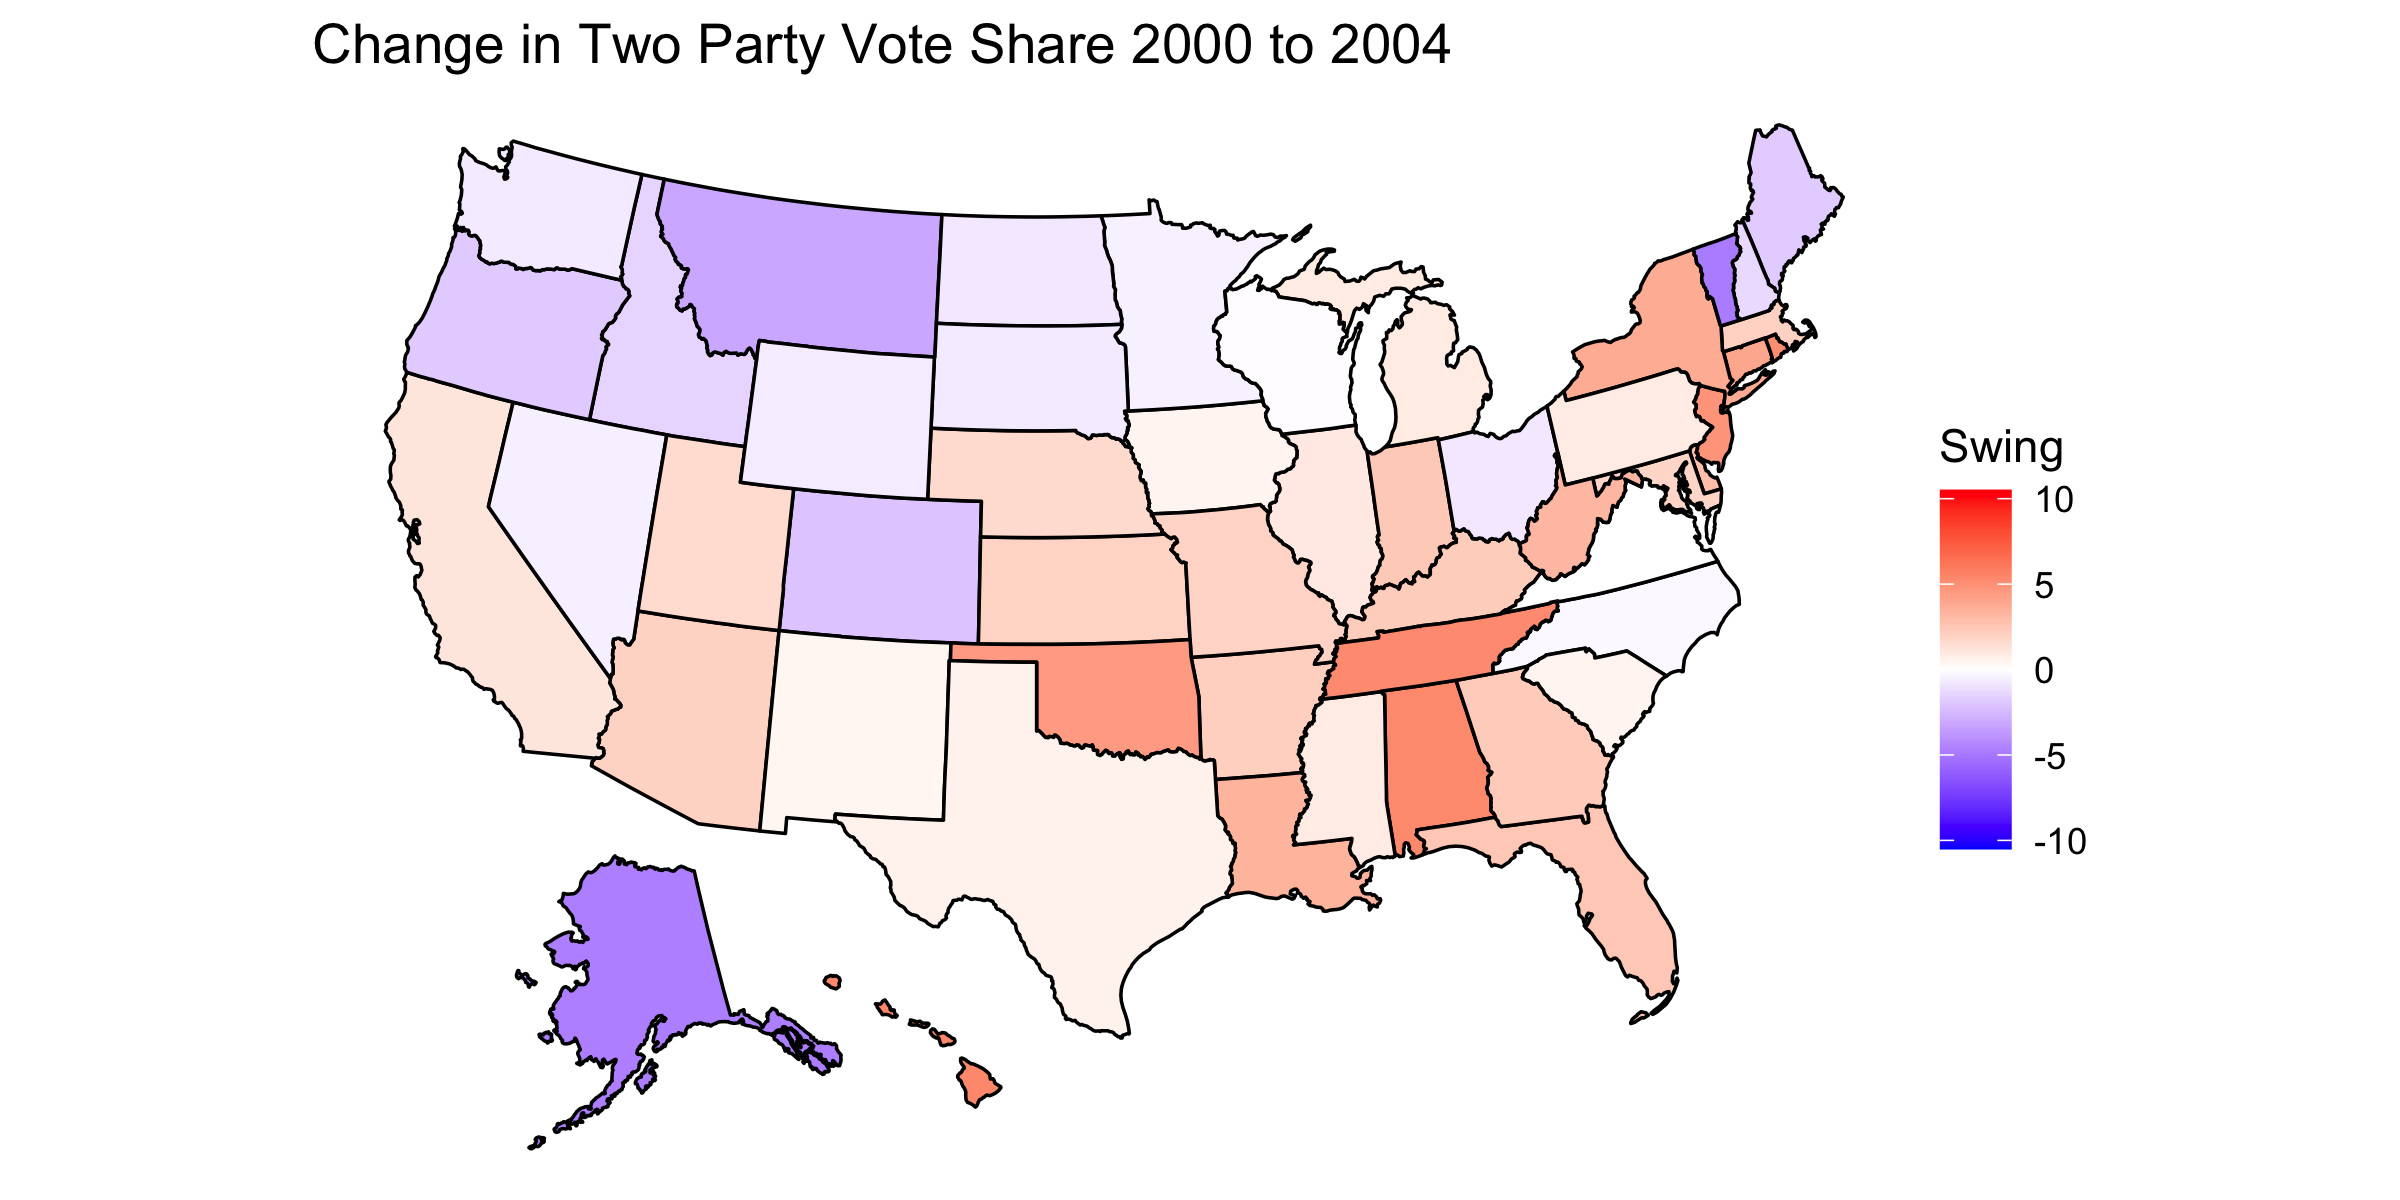 image of swing state 2008 to 2012